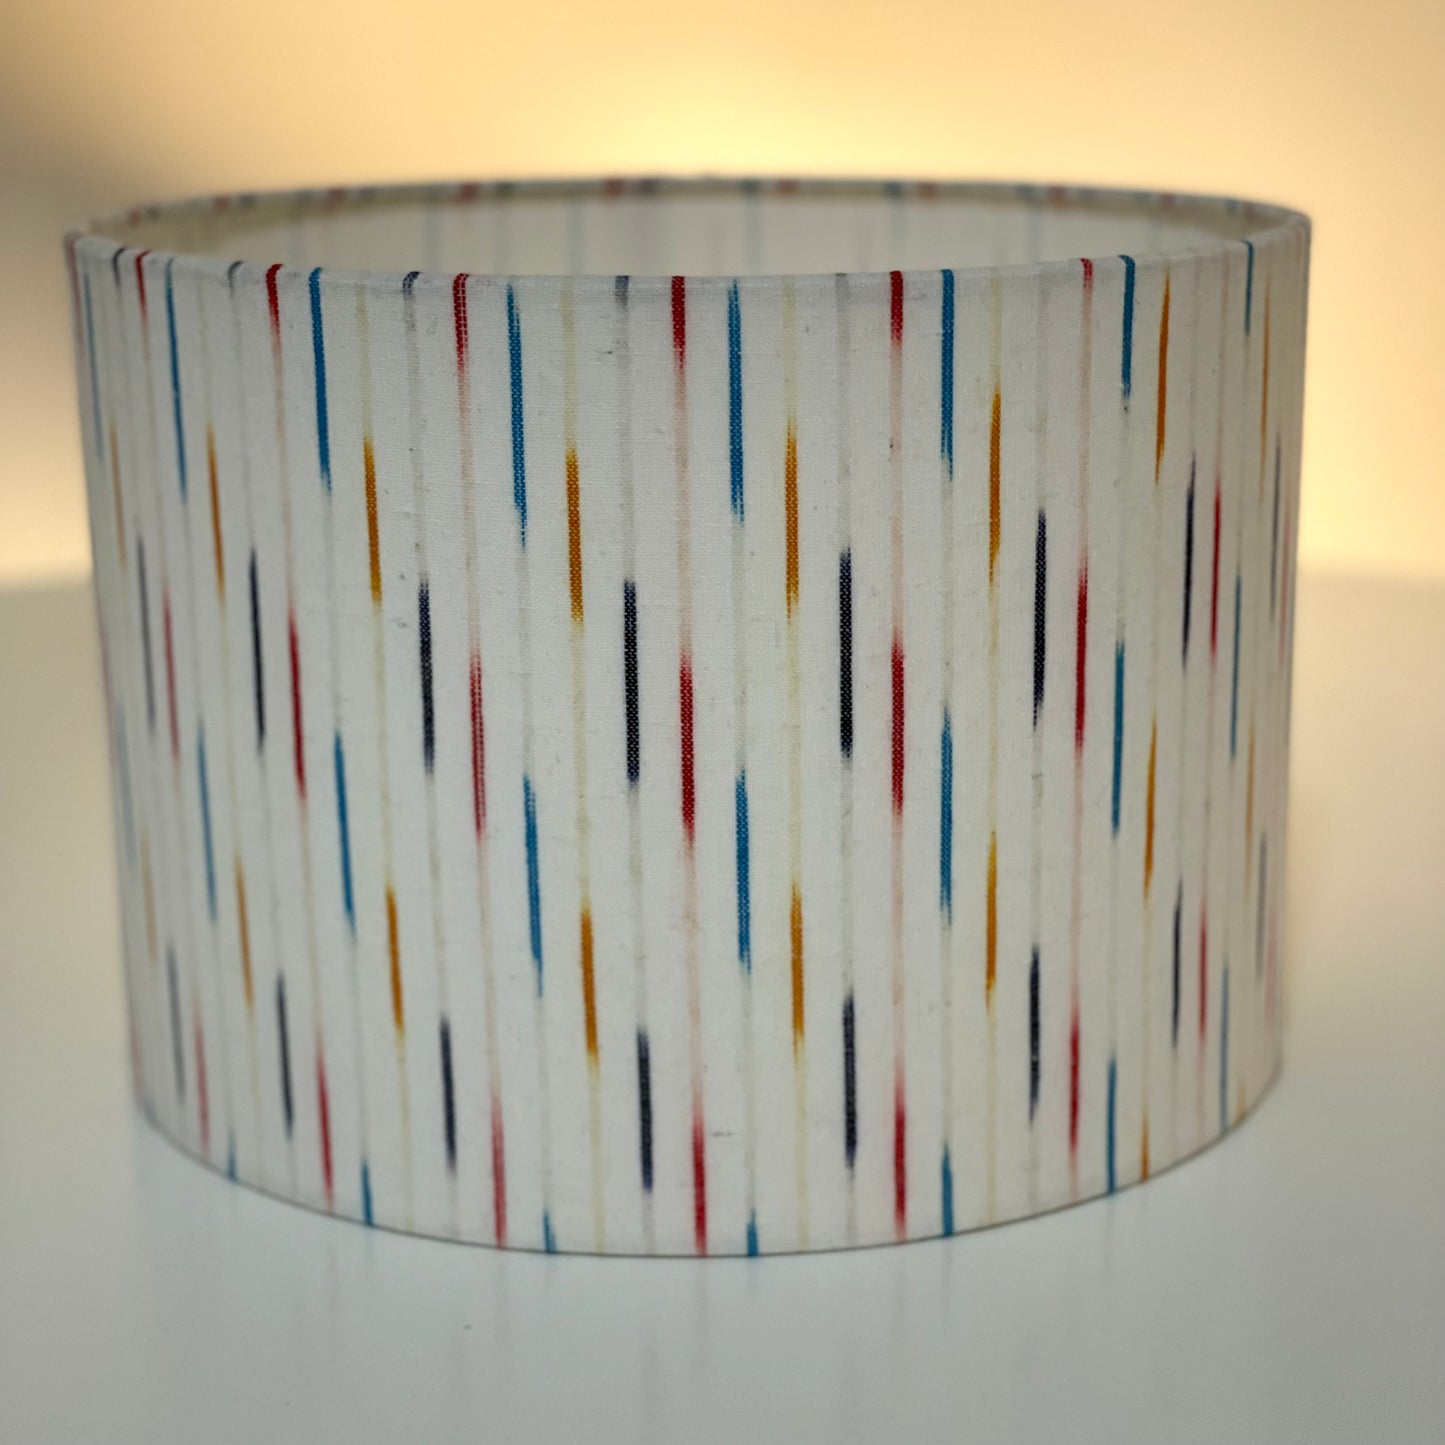 10 inch Drum Lampshade. Indian Pochampally Ikat Weave Cotton Fabric. Multicolor with White.